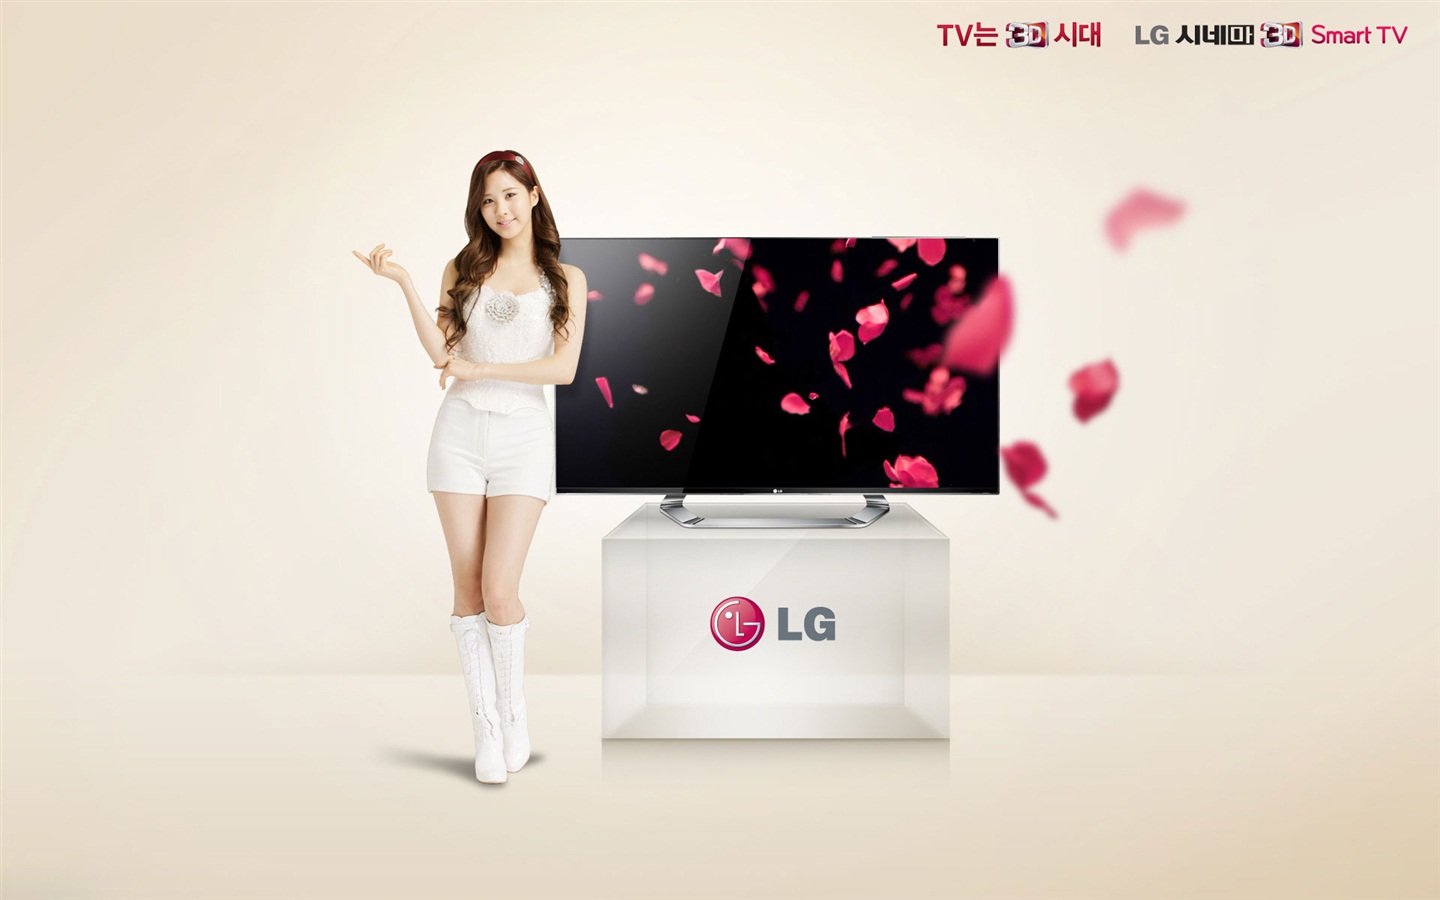 Girls Generation ACE and LG endorsements ads HD wallpapers #16 - 1440x900